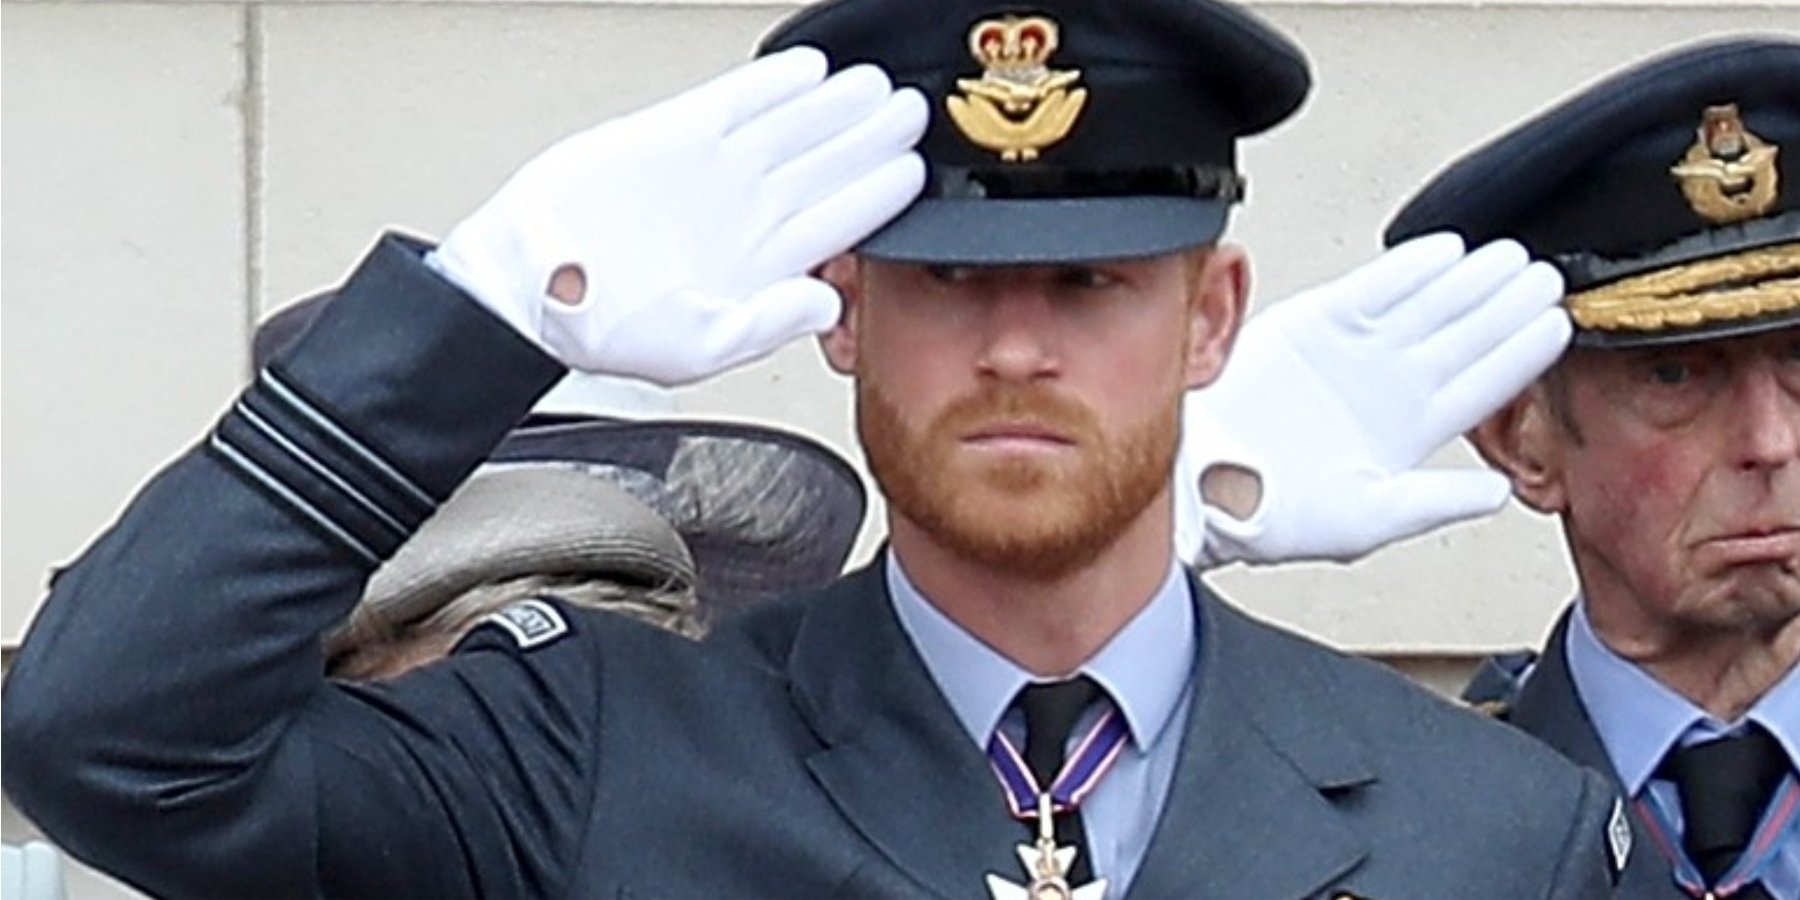 Prince Harry ‘Highly Respected’ by Palace Officials, Allowed to Wear Military Uniform for Special Queen Elizabeth Vigil